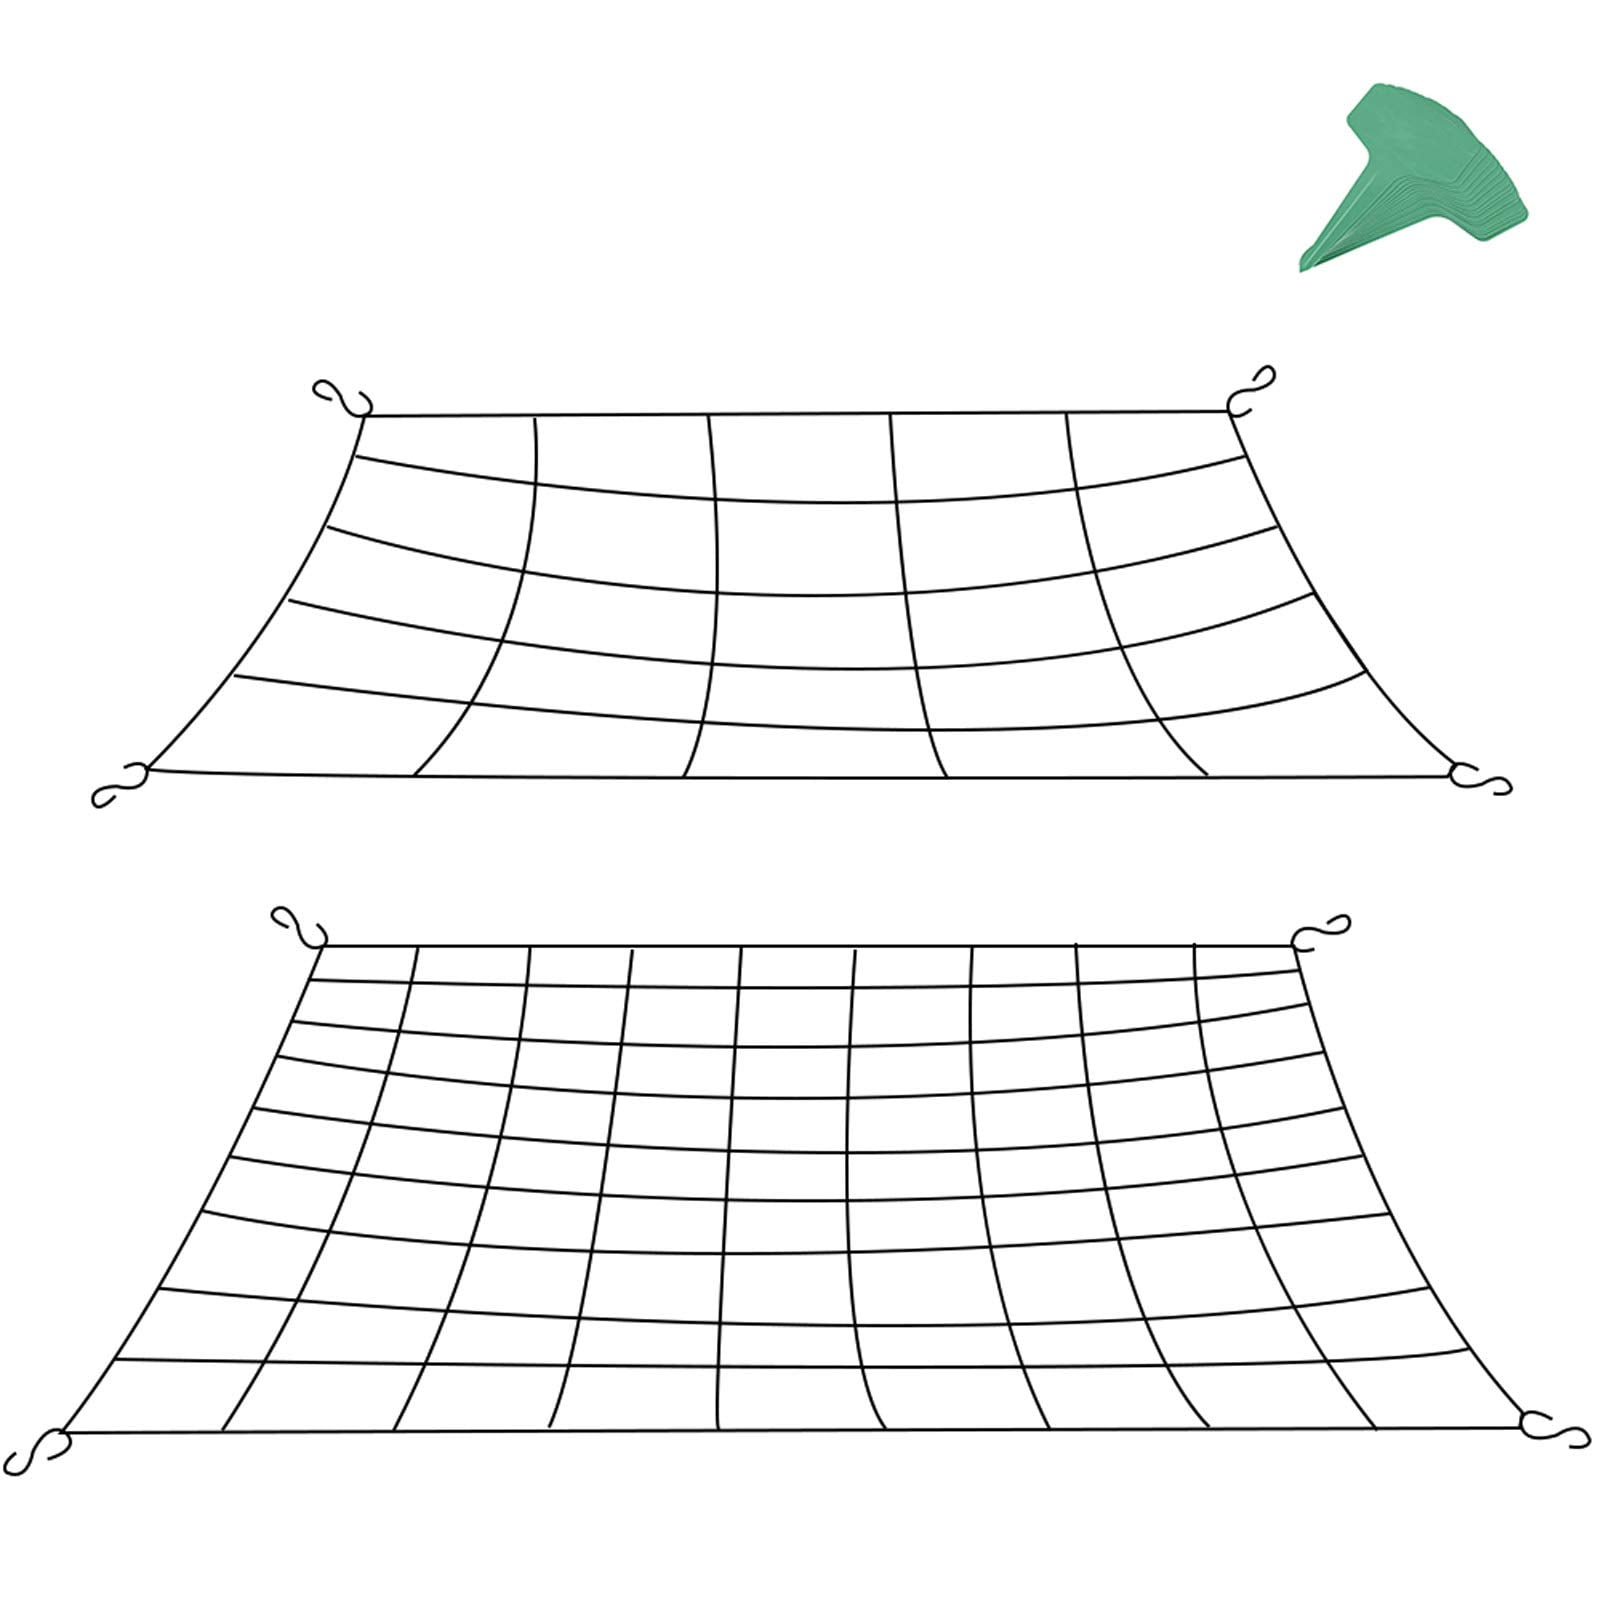 Fits 4x4 and More Size,... GROWNEER Flexible Net Trellis for Grow Tents 